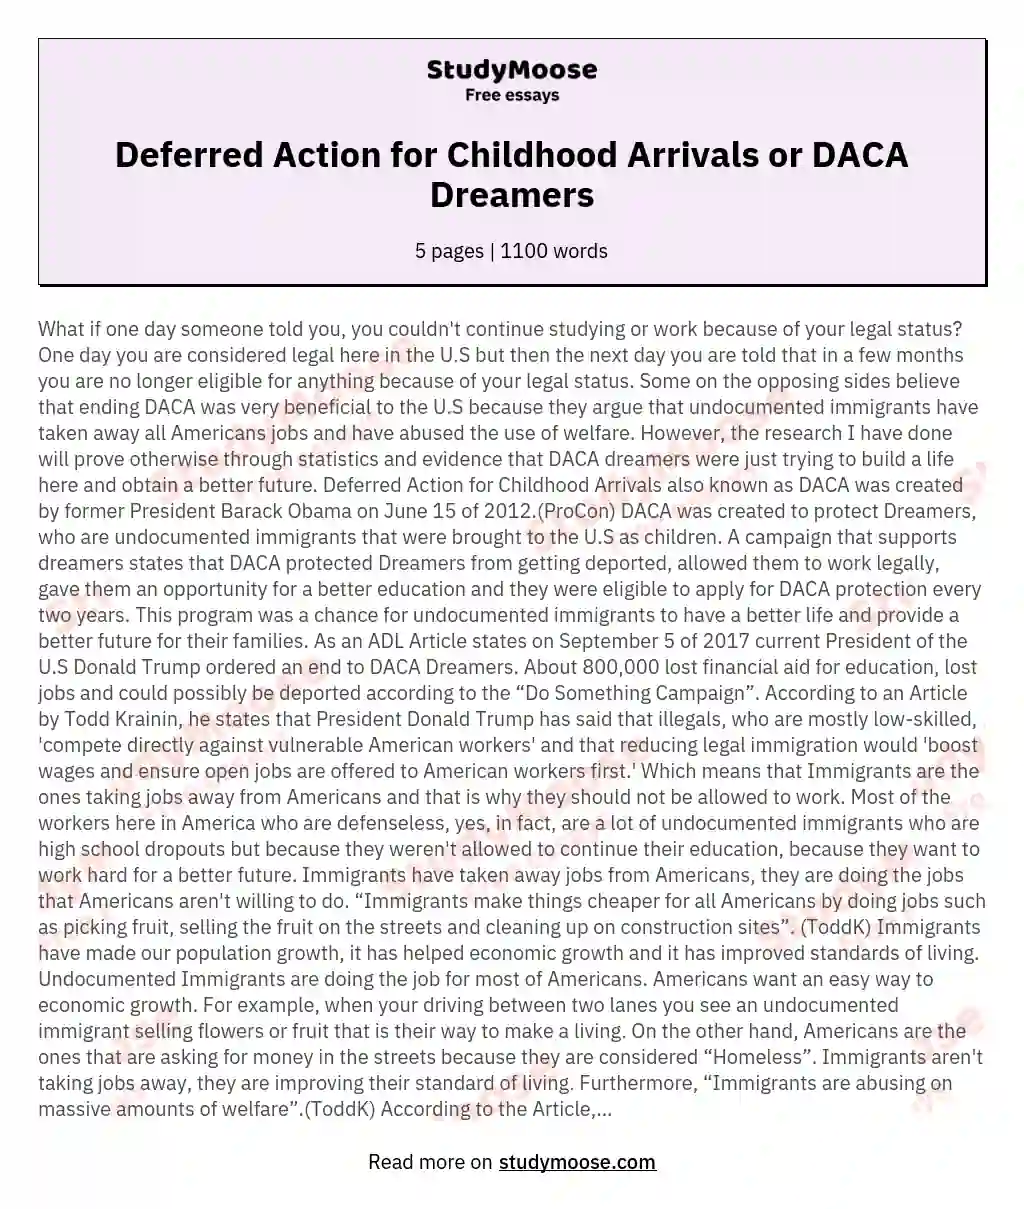 Deferred Action for Childhood Arrivals or DACA Dreamers